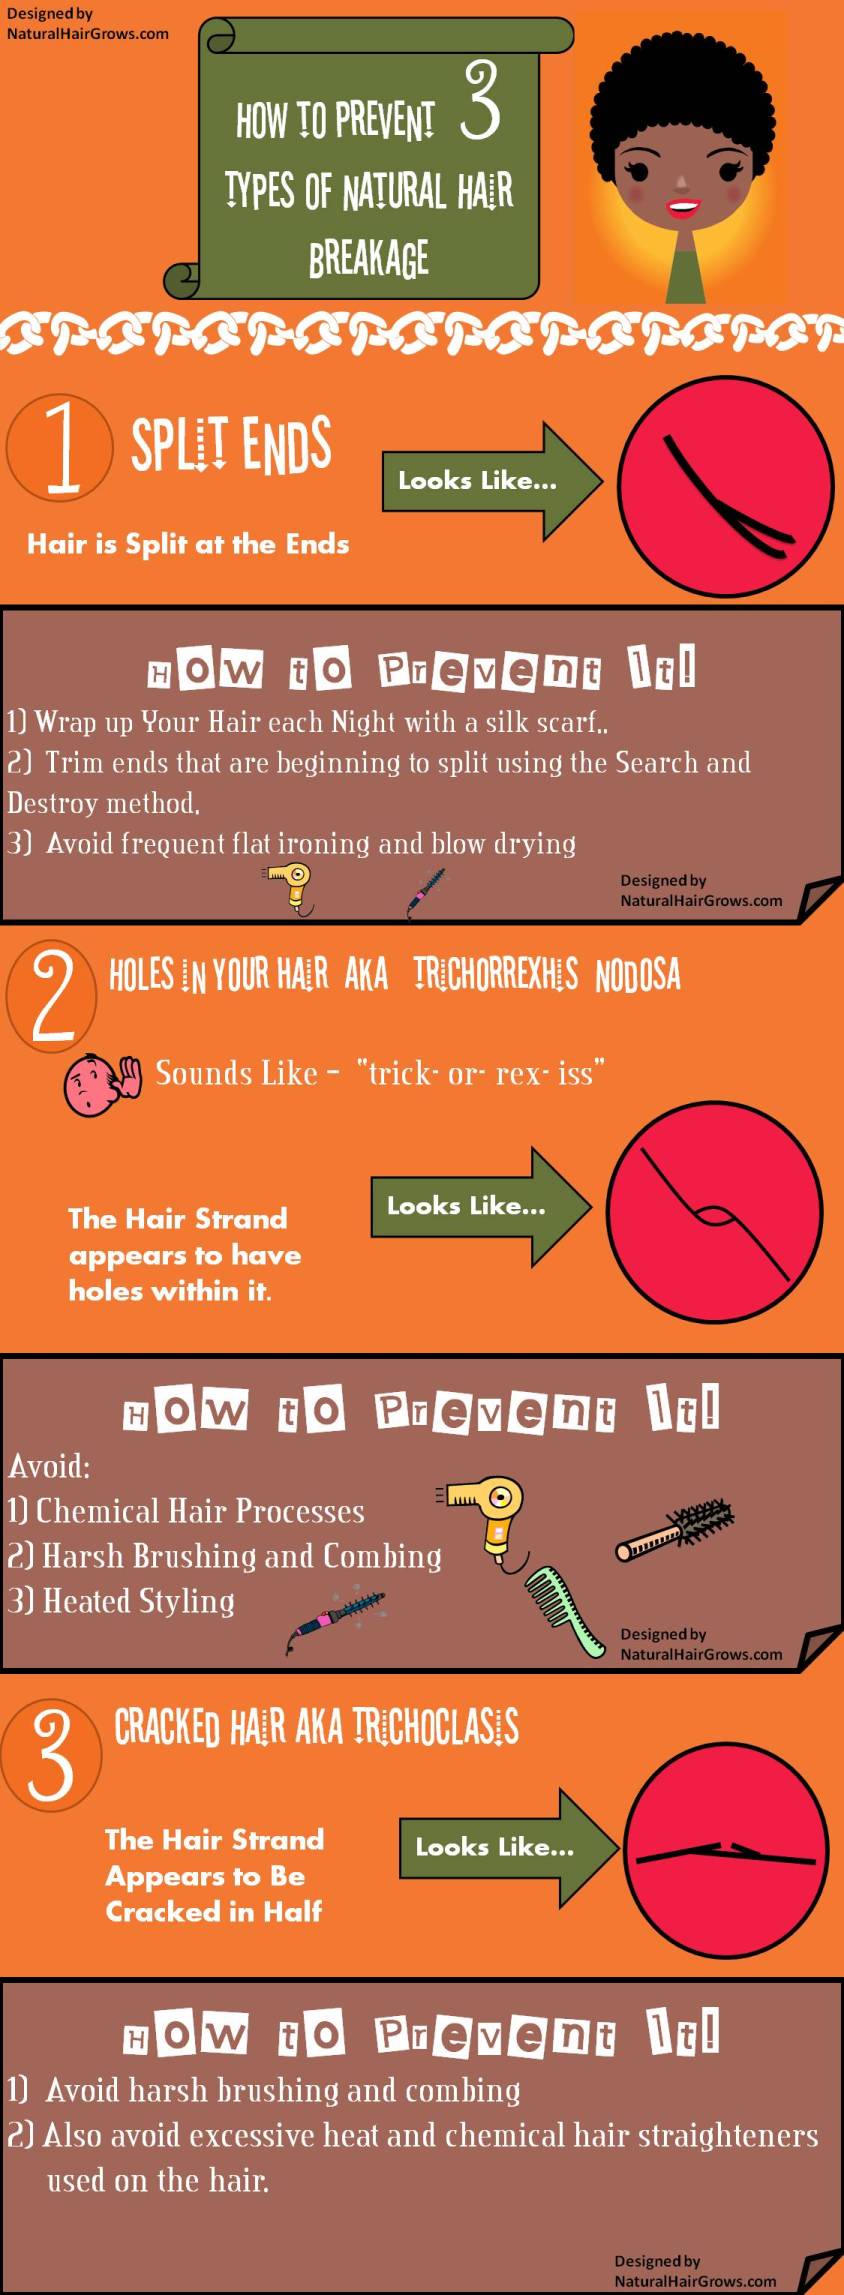 Natural Hair Care Infographic: Preventing Natural Hair Breakage